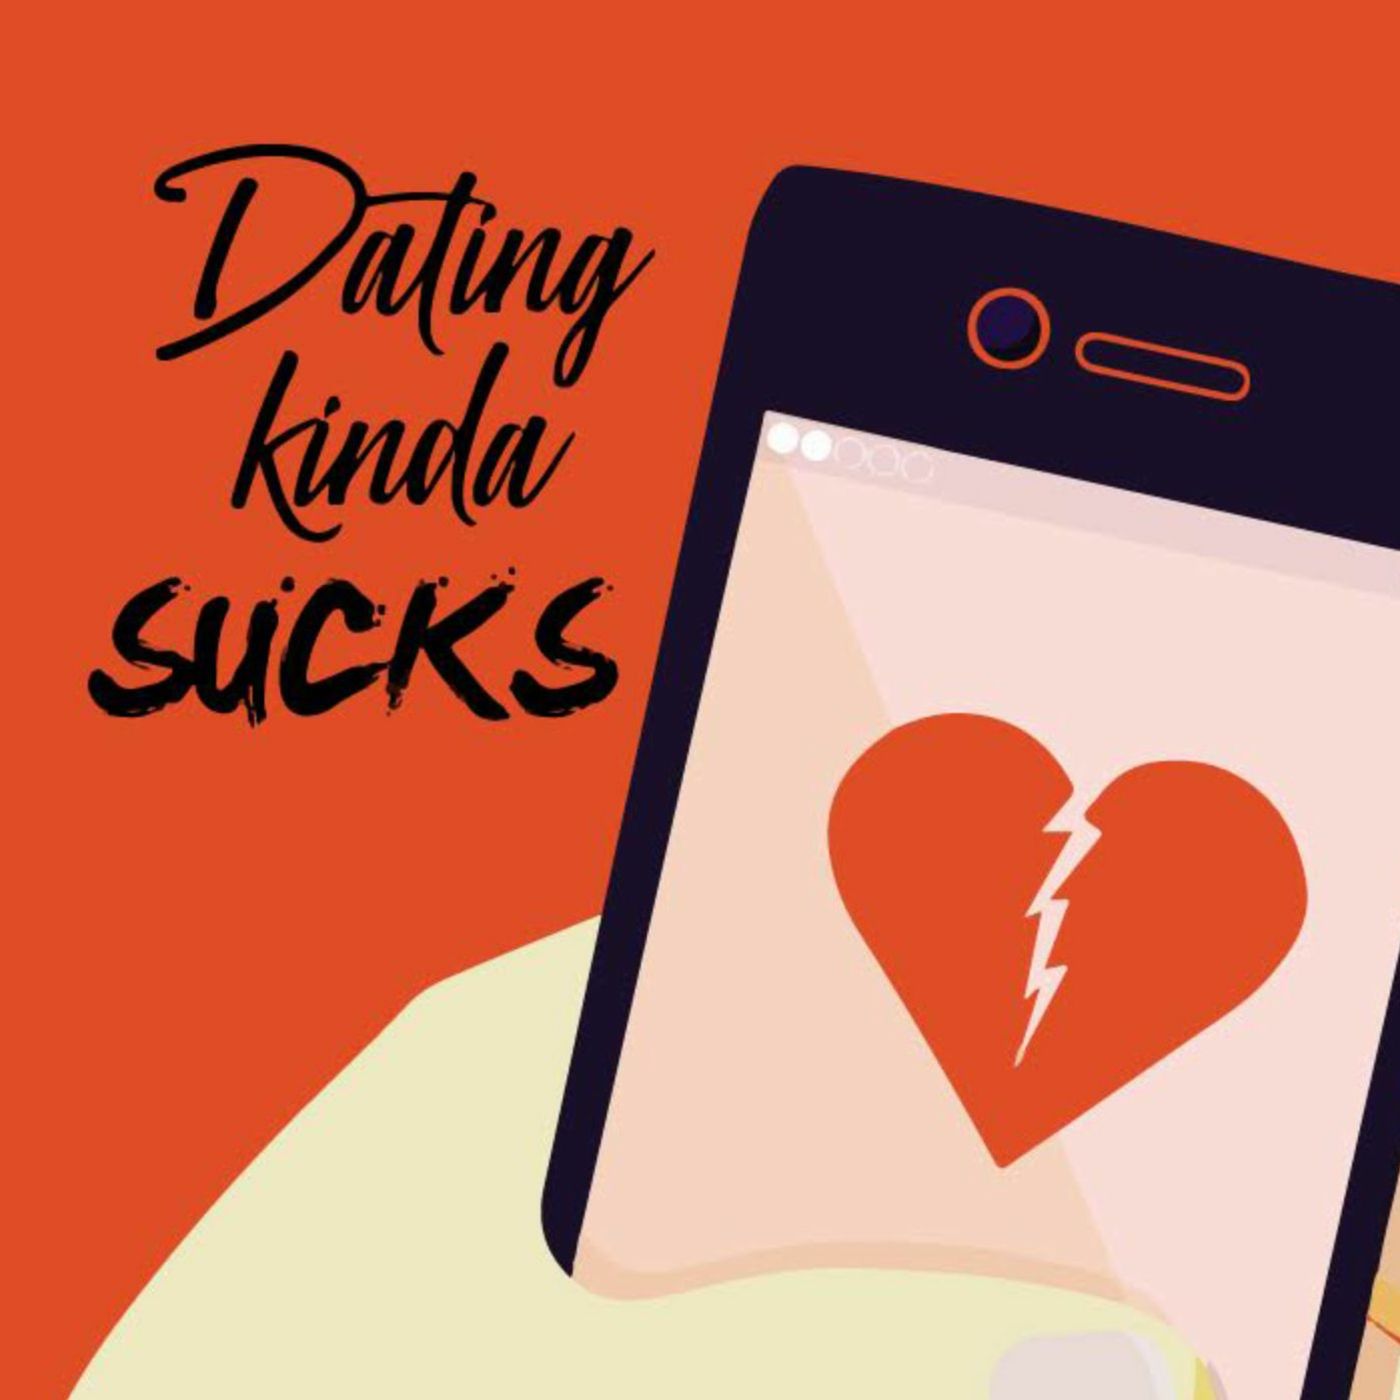 Season Two Live Finale: Dating Apps, Dating When Older, and More Audience Questions